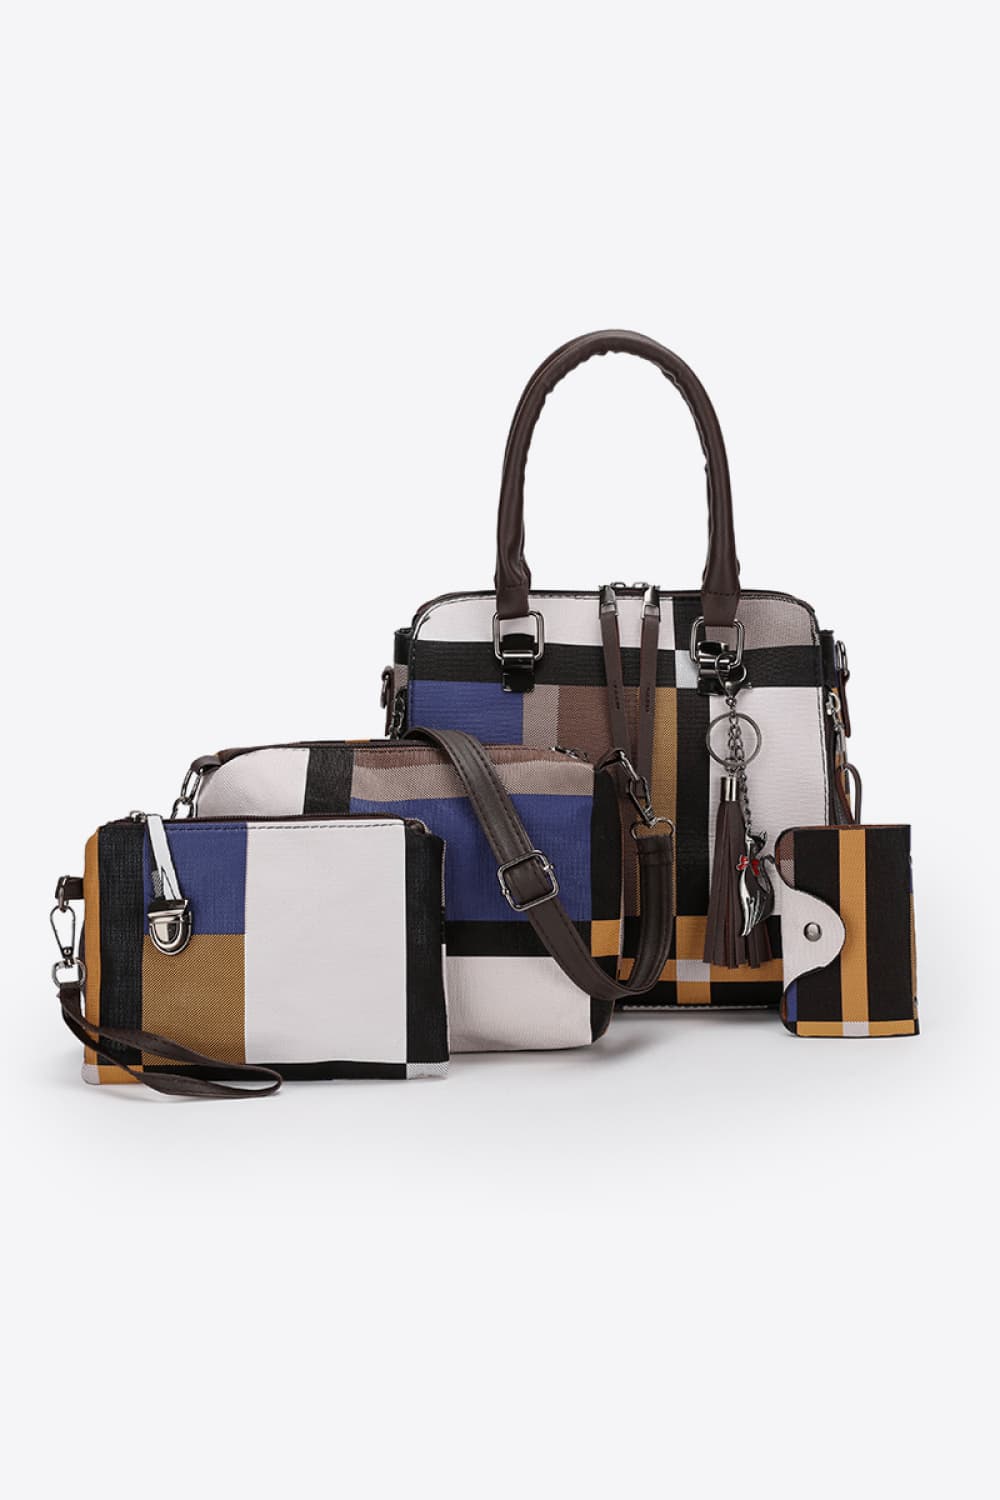 FREE GIFT WITH $150 PURCHASE Hutton Leather Bag 4-Piece Set